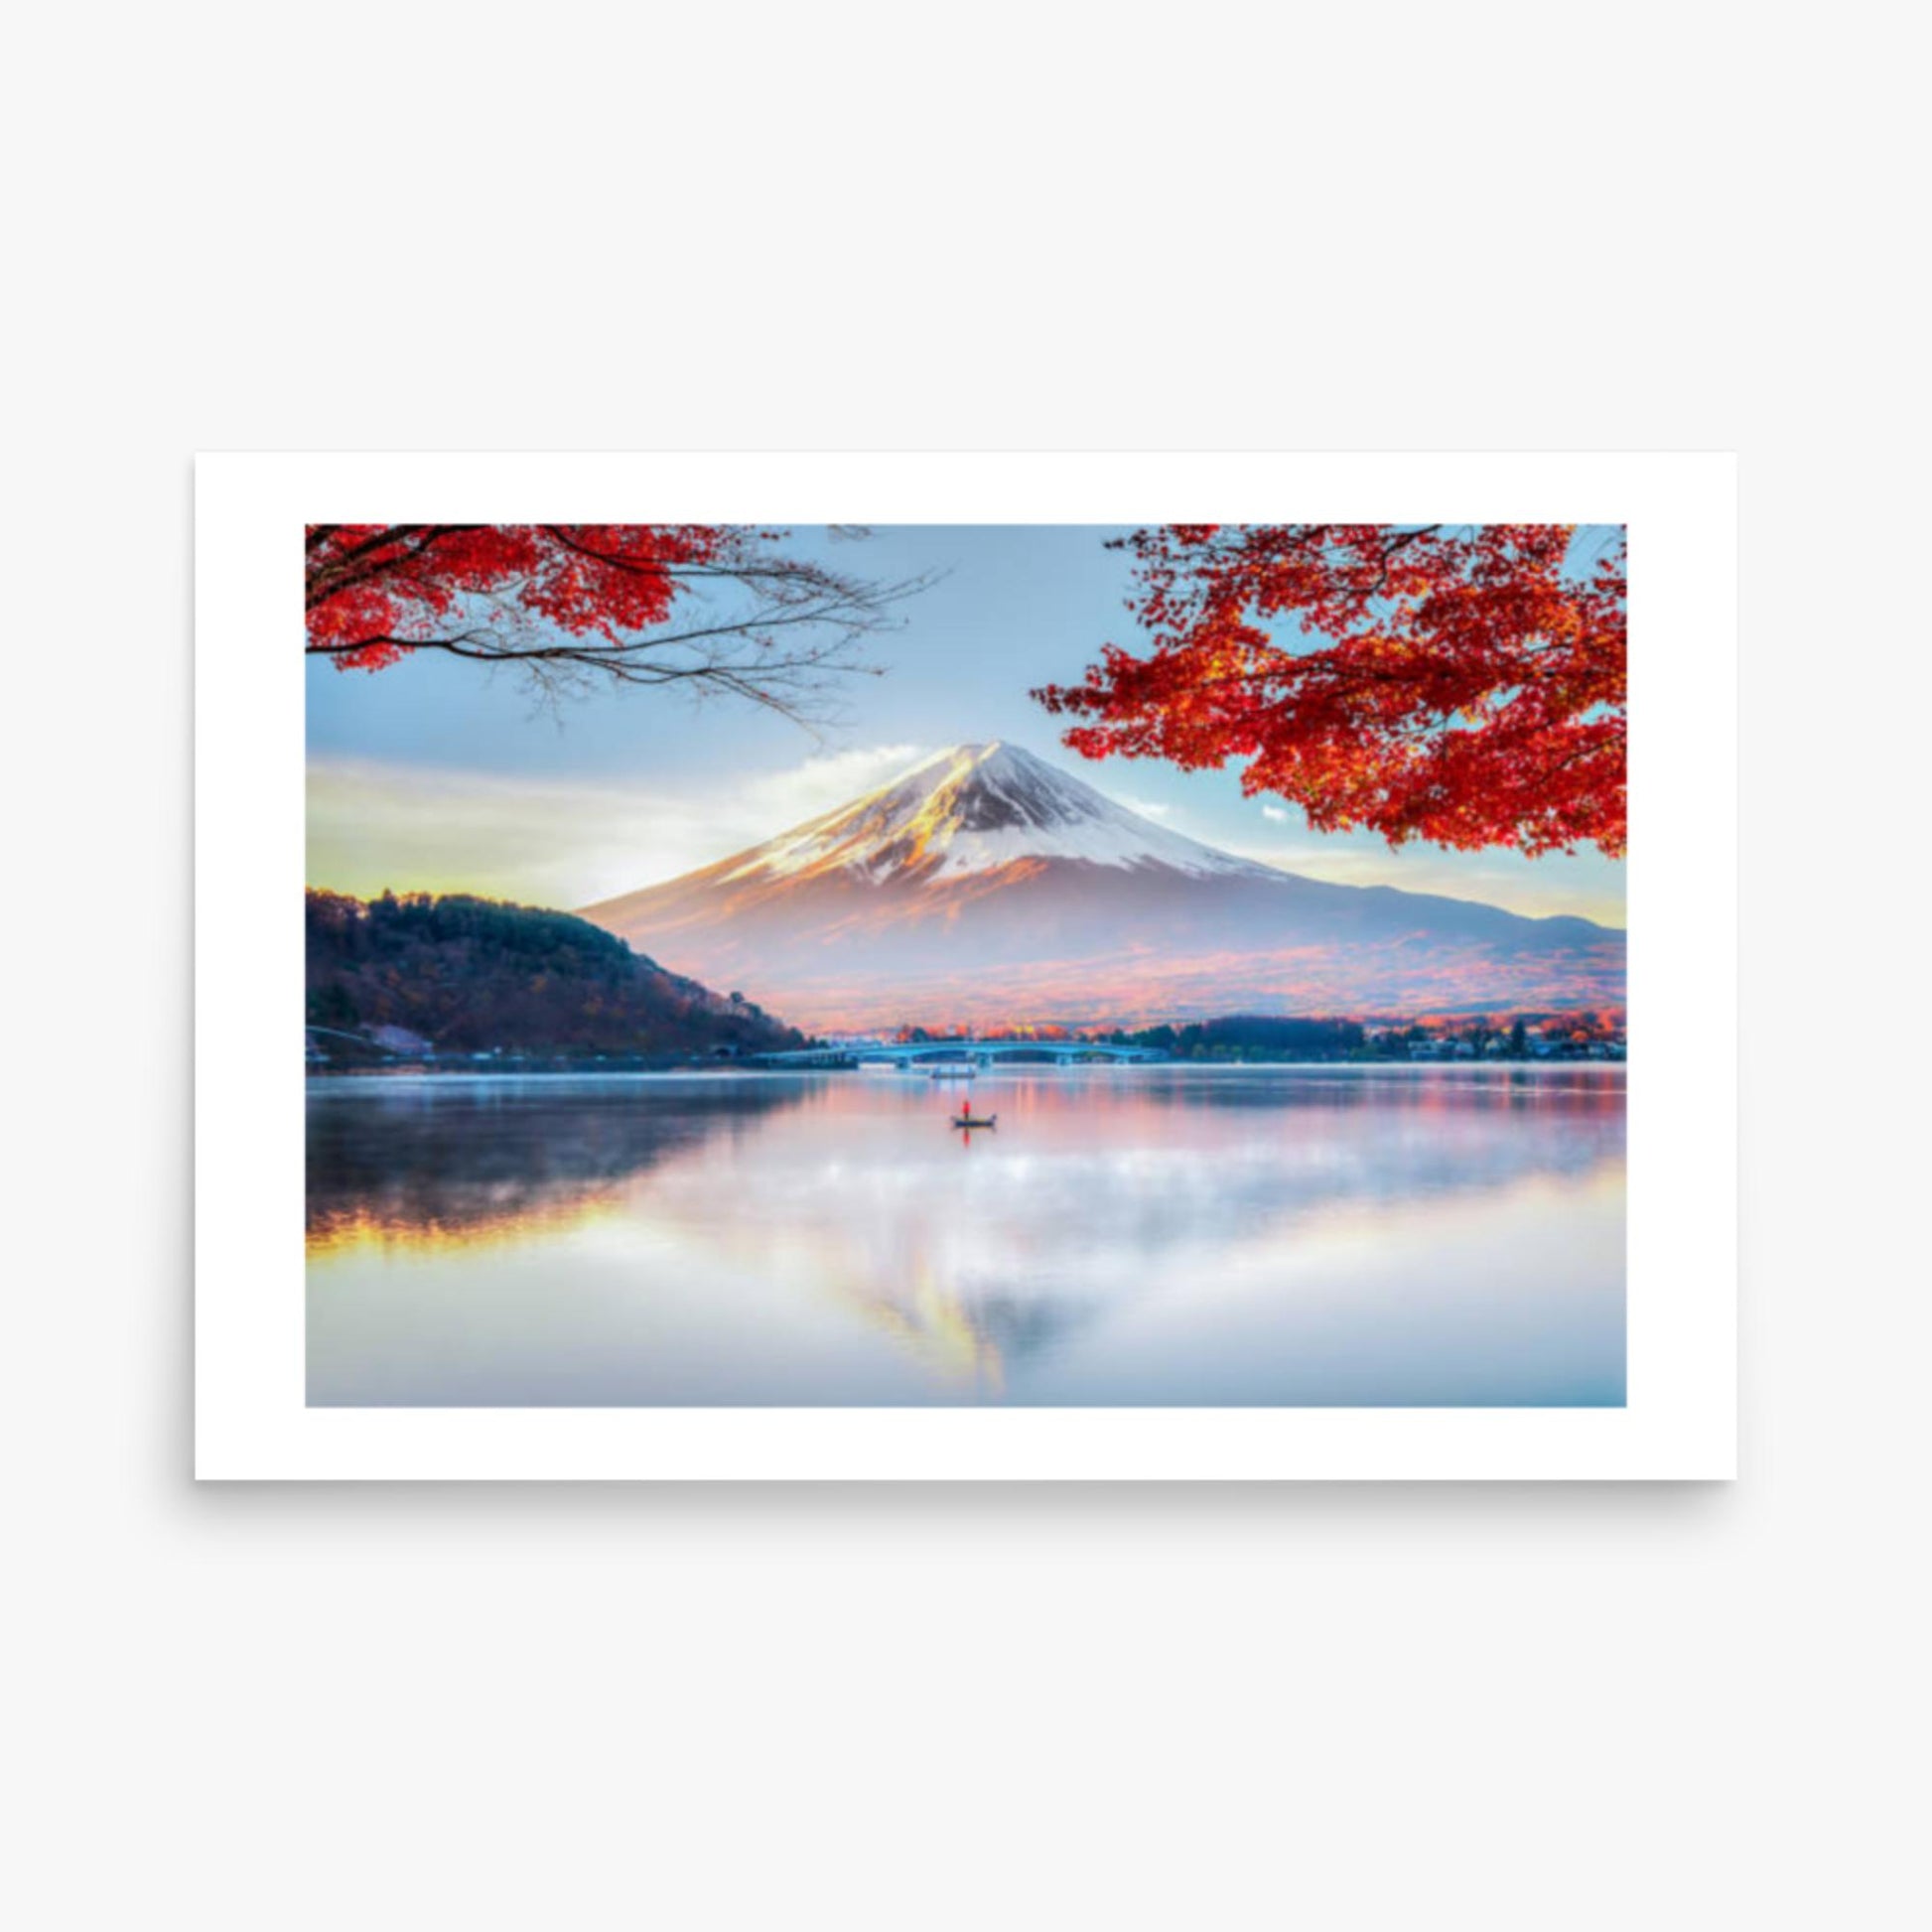 Fuji Mountain , Red Maple Tree and Fisherman Boat with Morning Mist in Autumn, Kawaguchiko Lake, Japan 24x36 in Poster